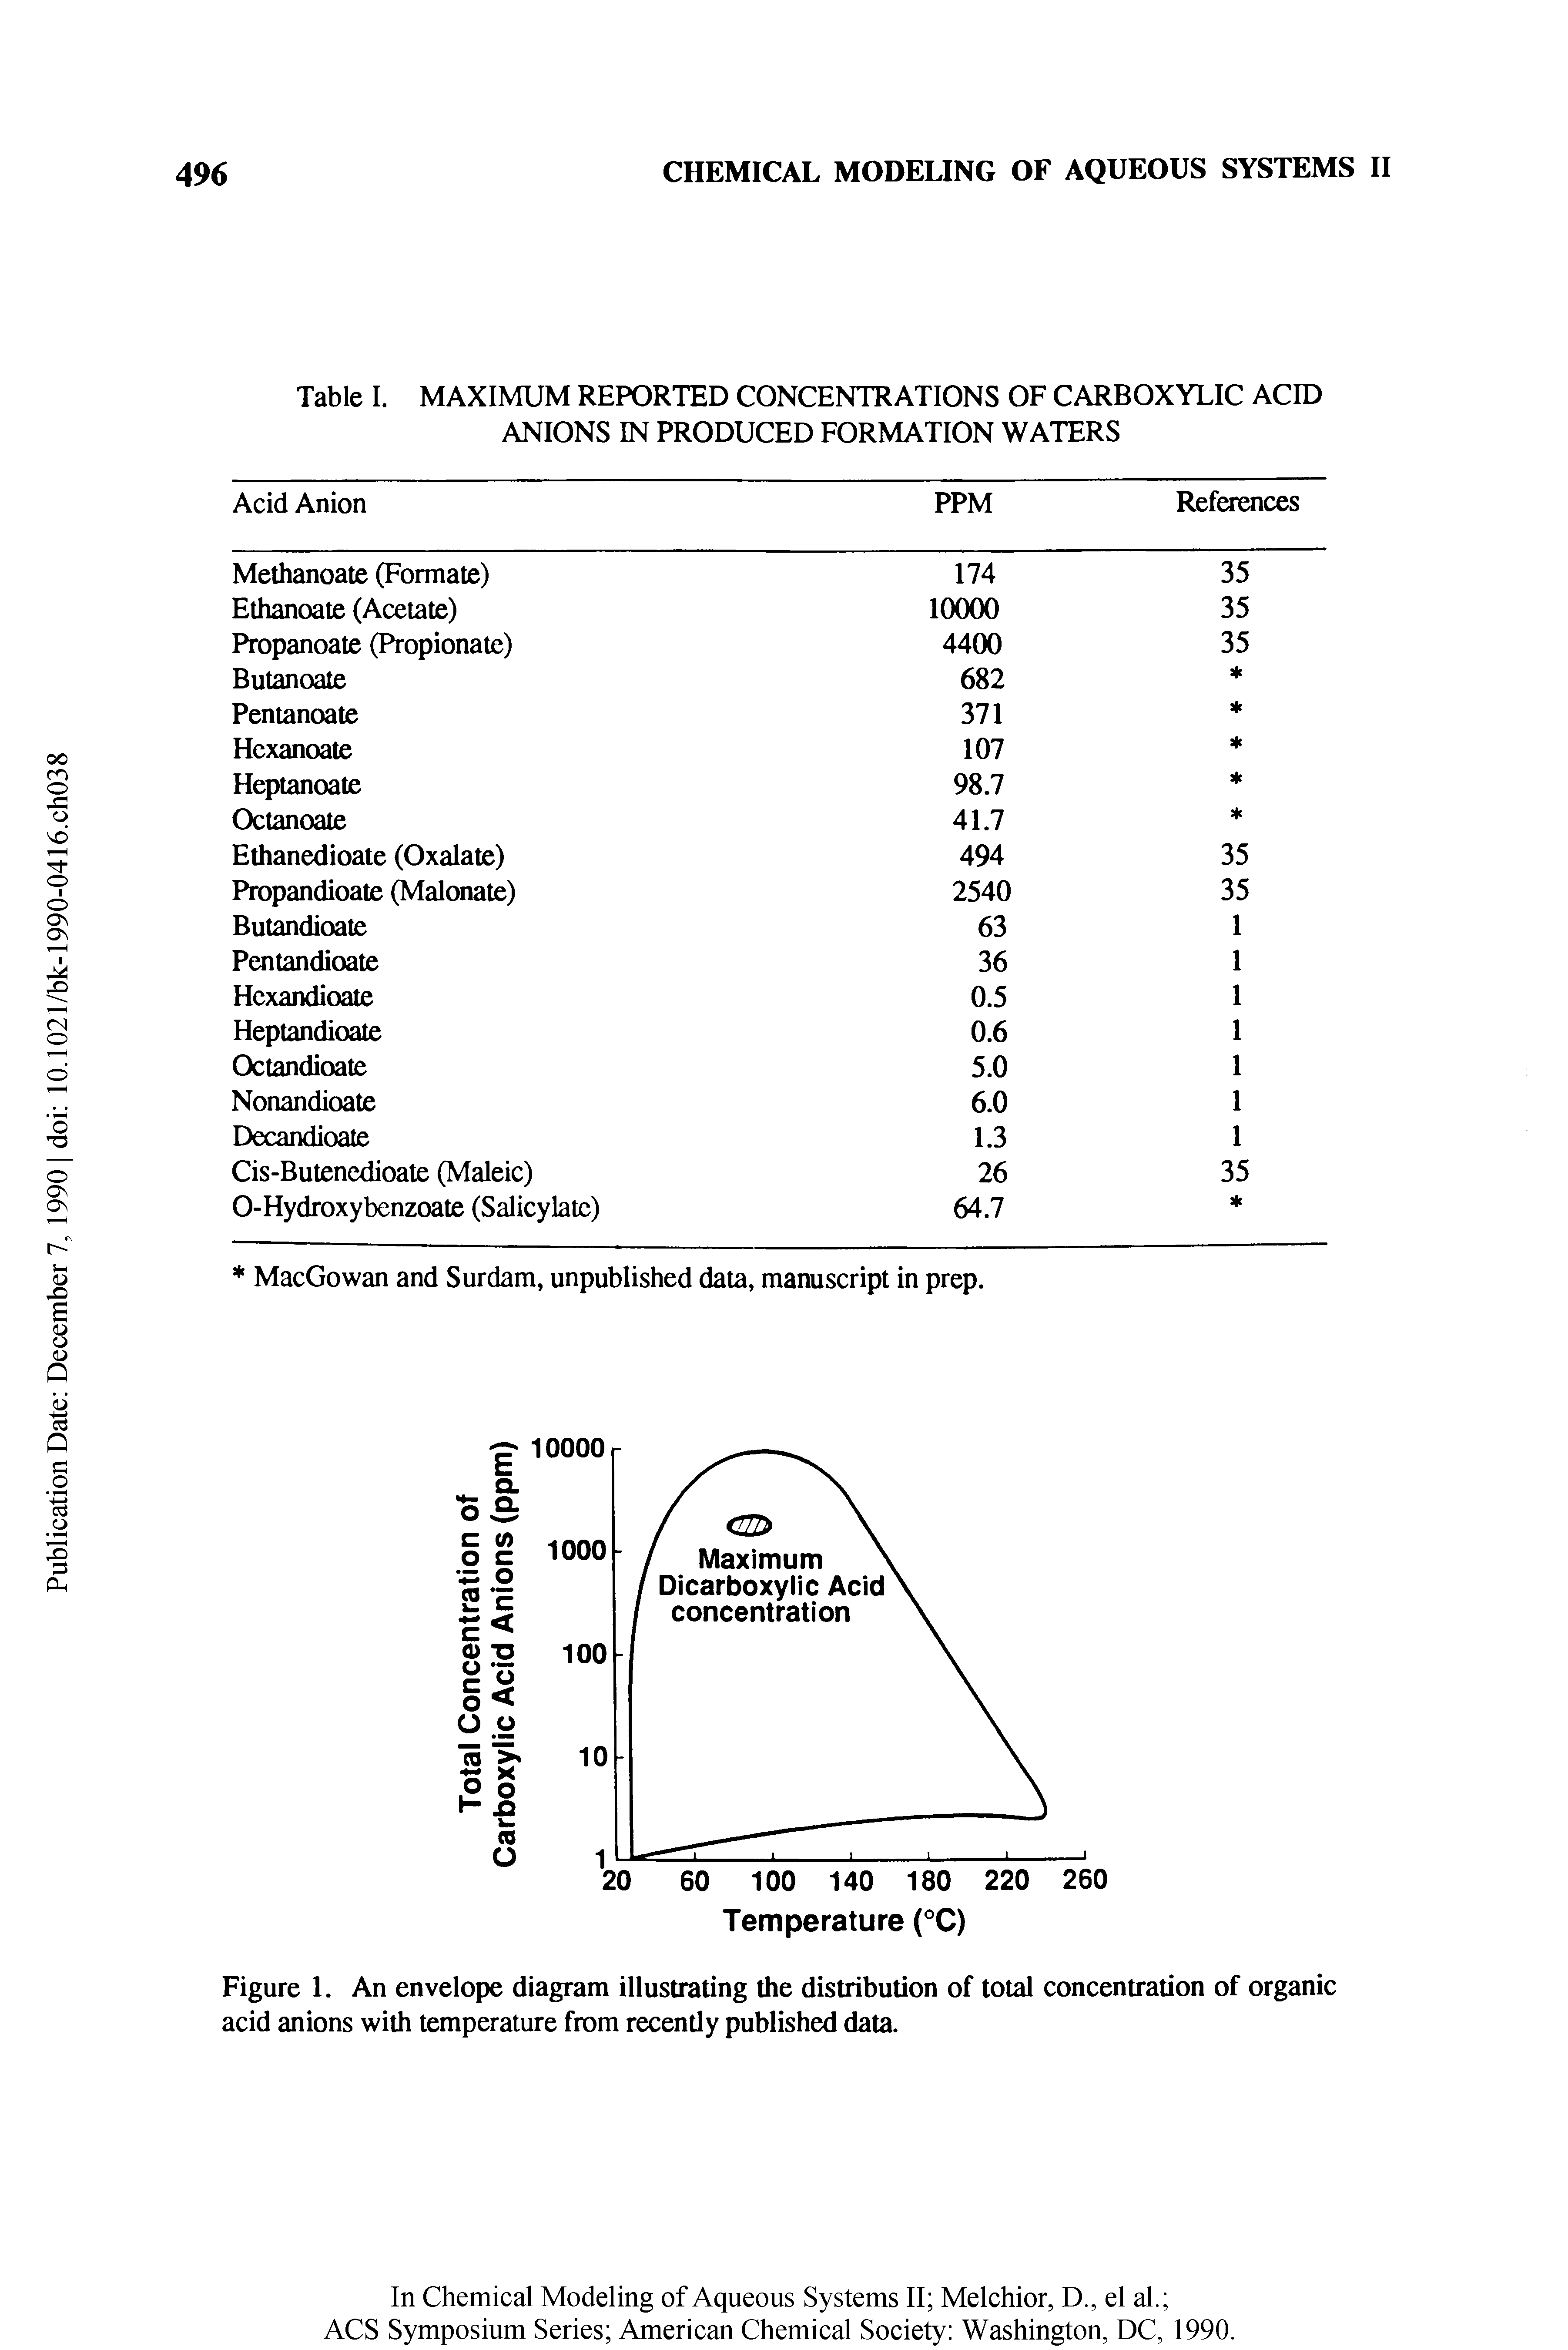 Table I. MAXIMUM REPORTED CONCENTRATIONS OF CARBOXYLIC ACID ANIONS IN PRODUCED FORMATION WATERS...